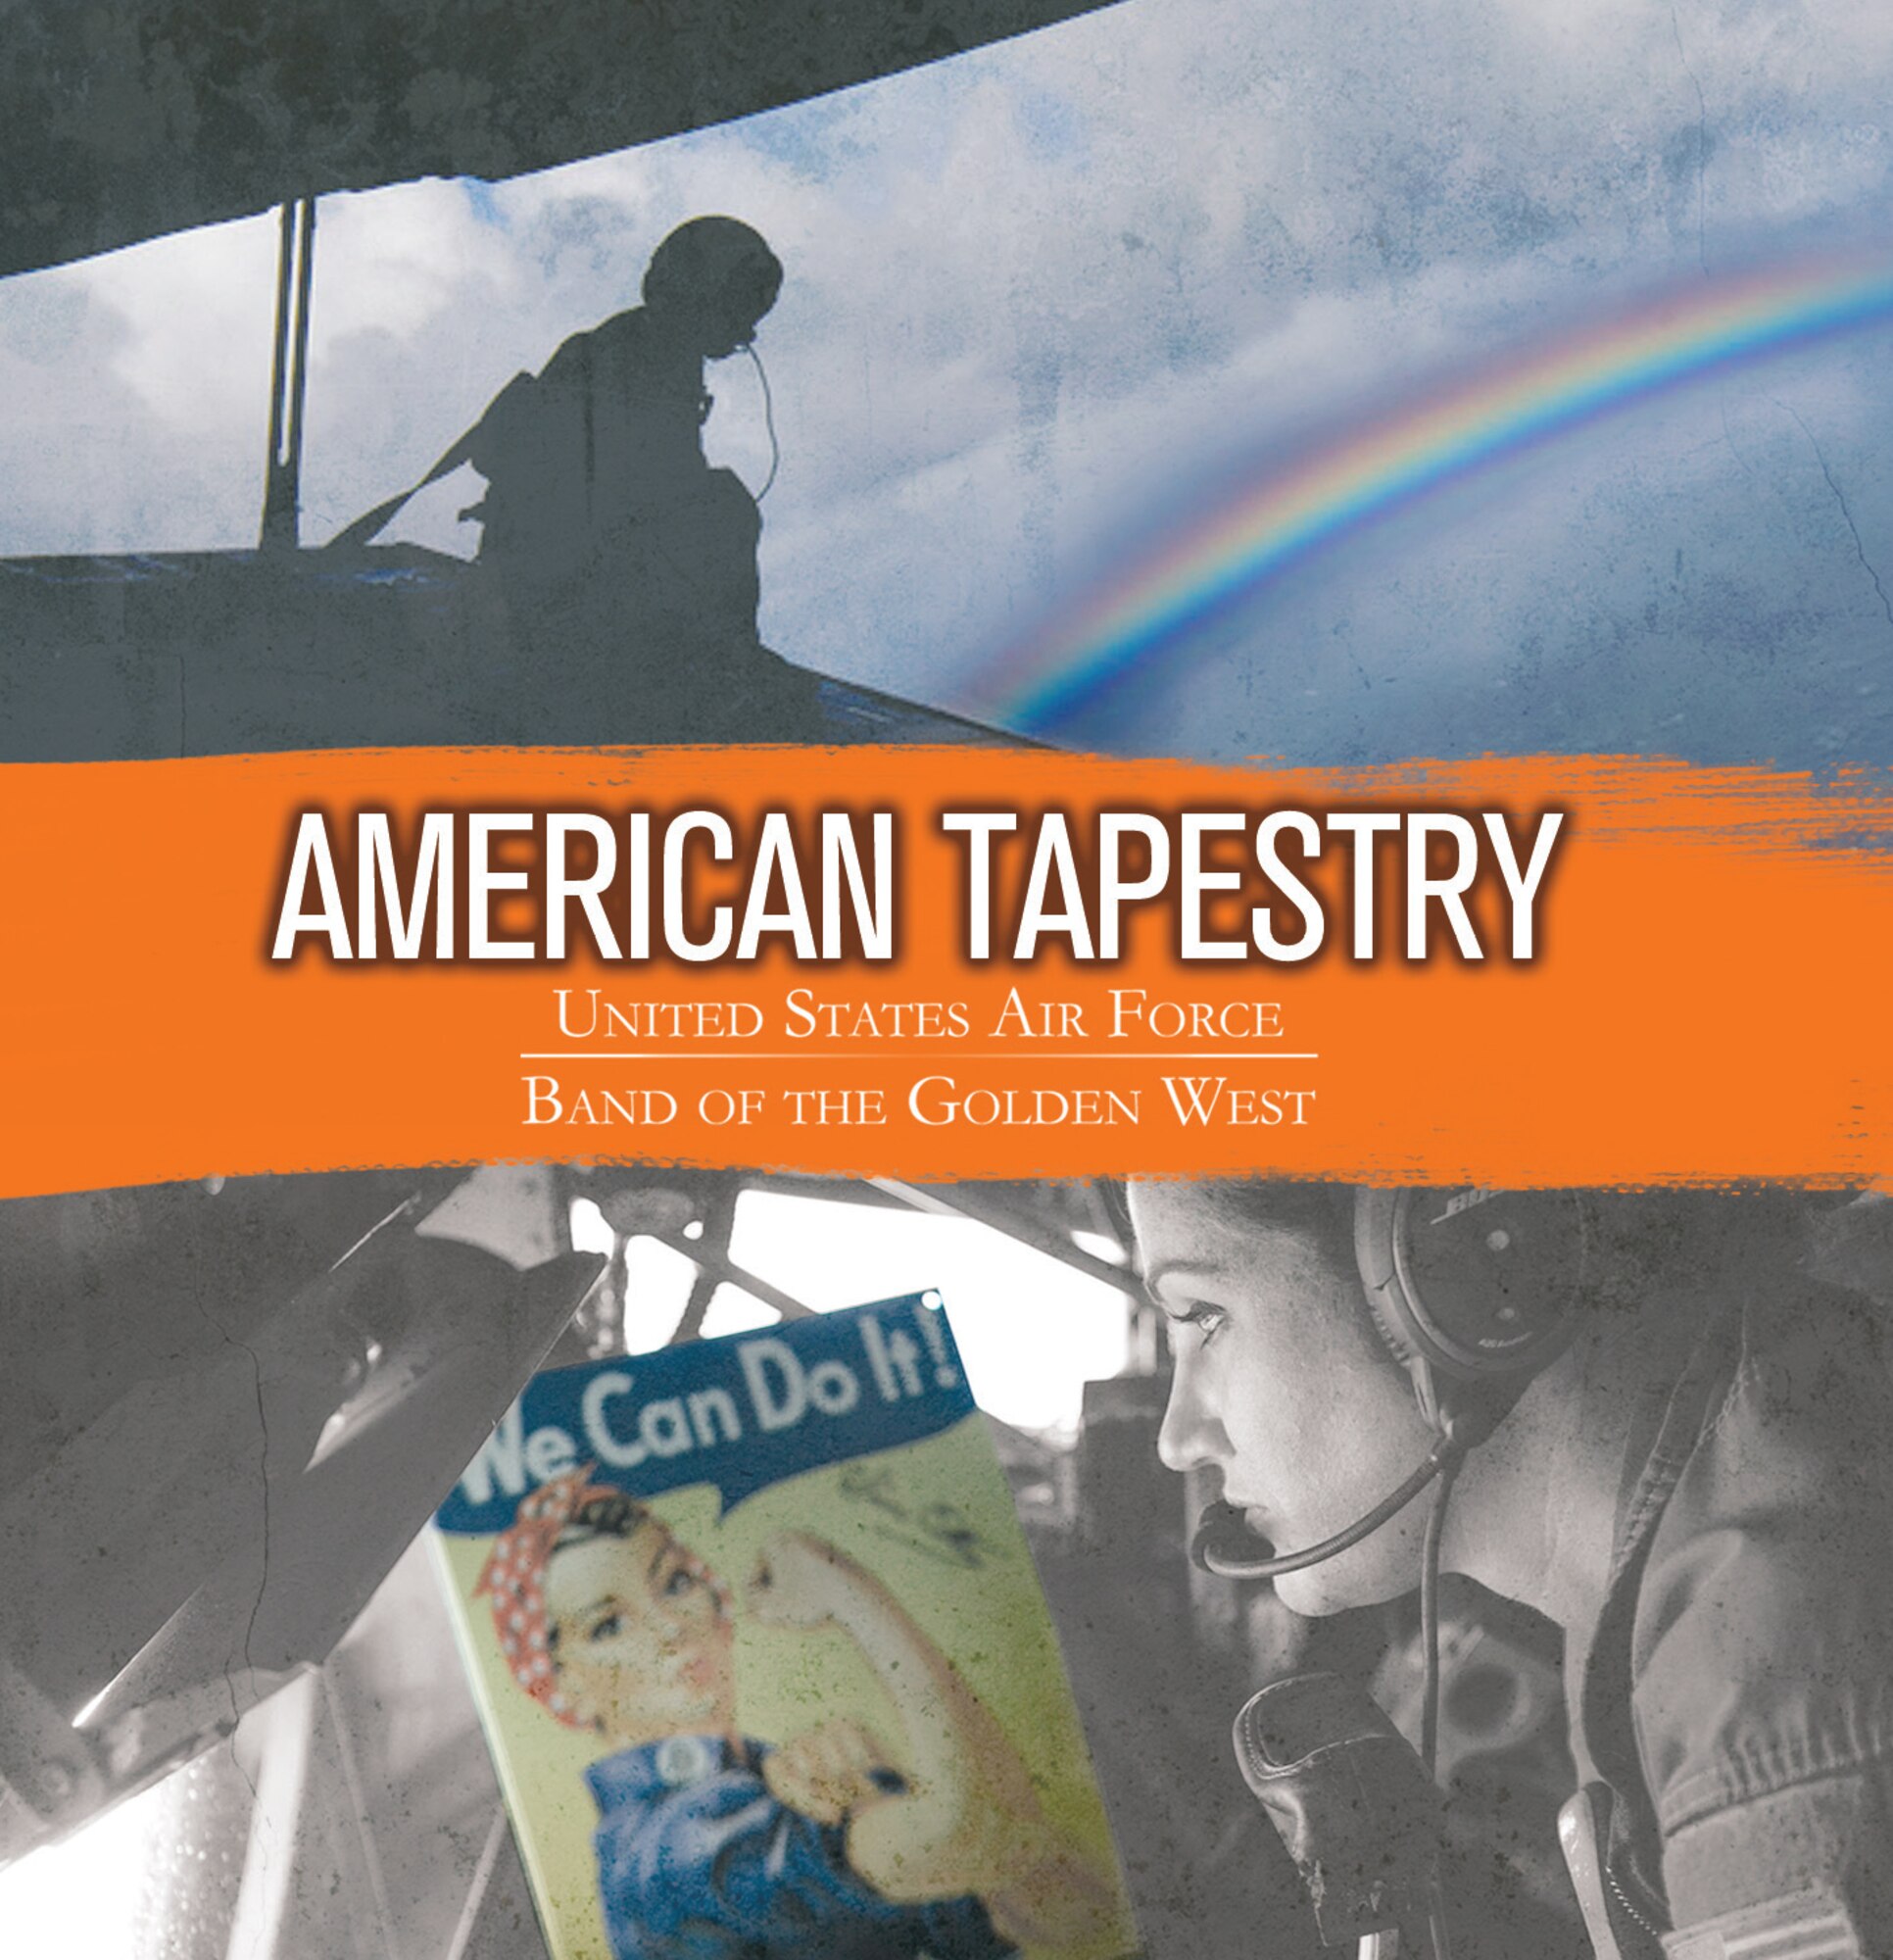 “American Tapestry,” the latest album from the U.S. Air Force Band of the Golden West, focuses on diversity among Americans and their experiences. Several new works were commissioned for inclusion in the piece. (U.S. Air Force graphic/Everett Rein)